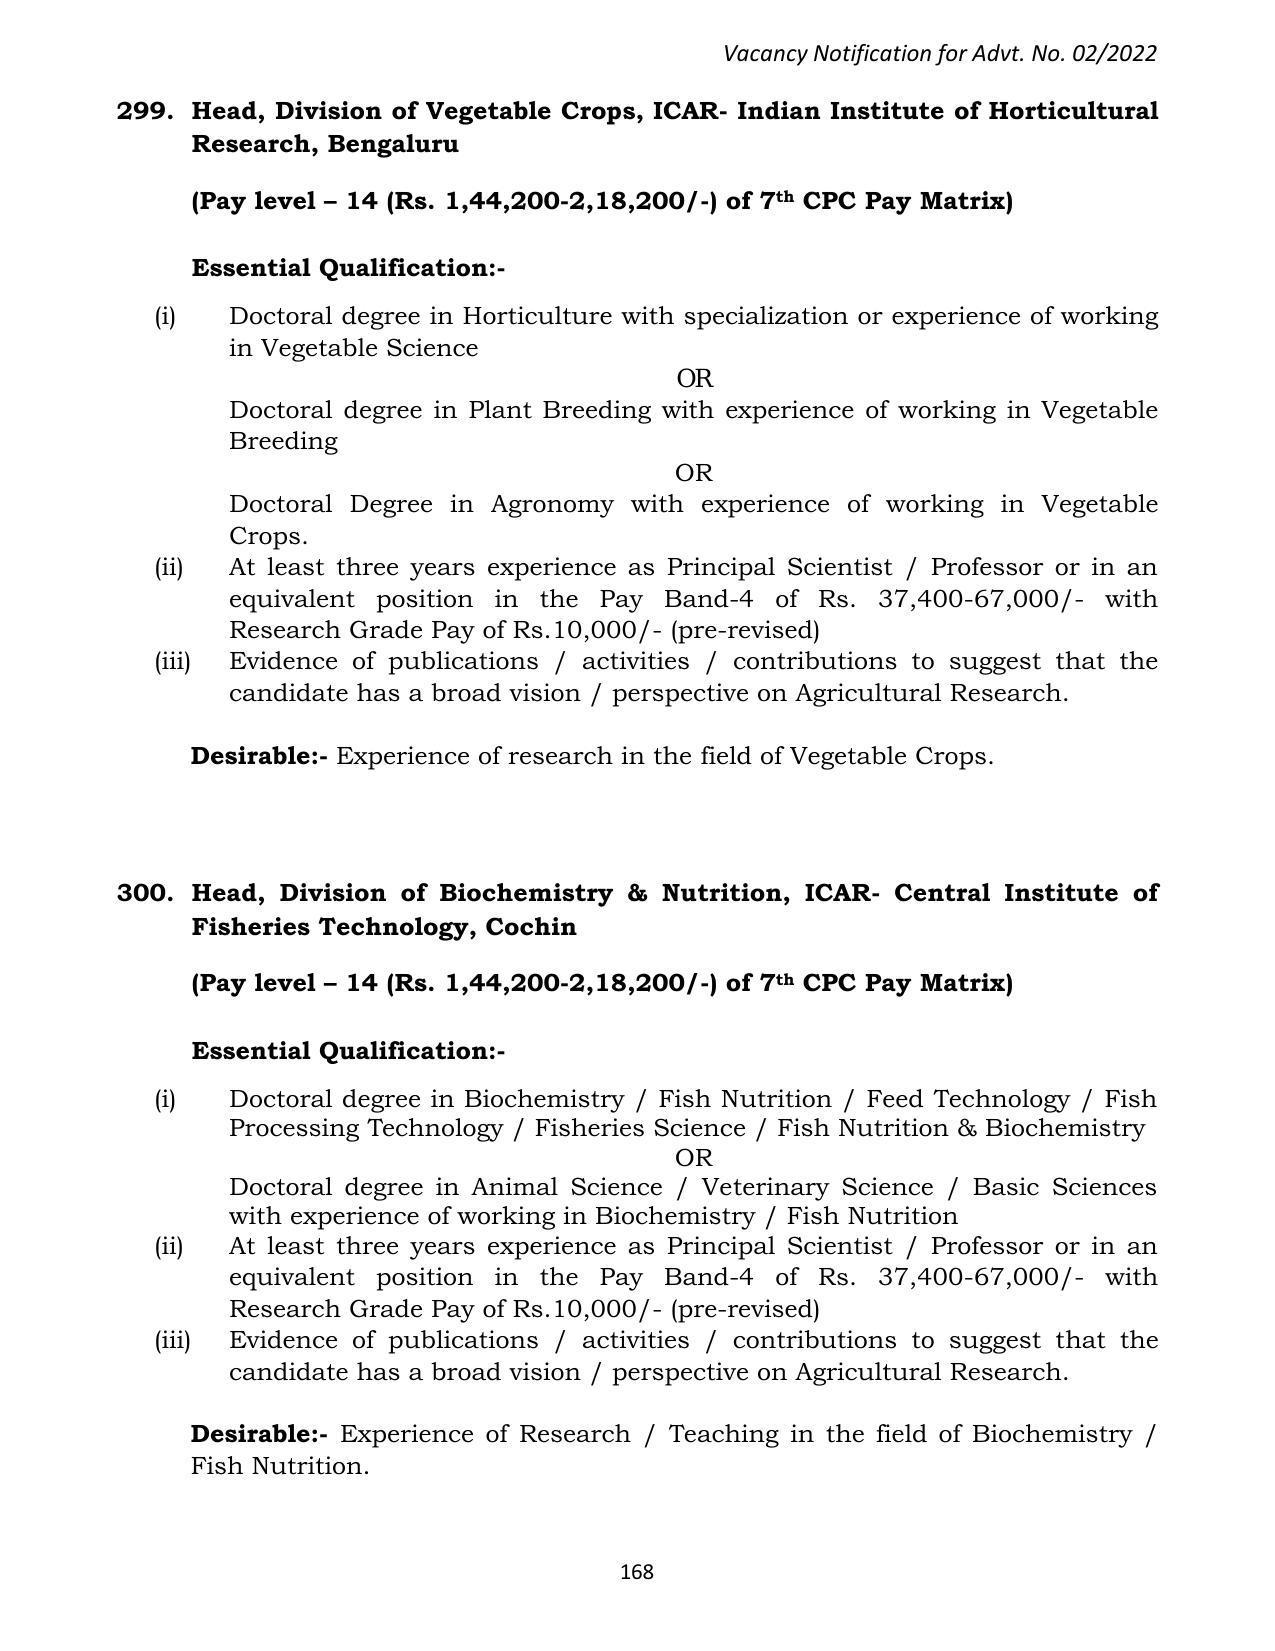 ASRB Non-Research Management Recruitment 2022 - Page 41